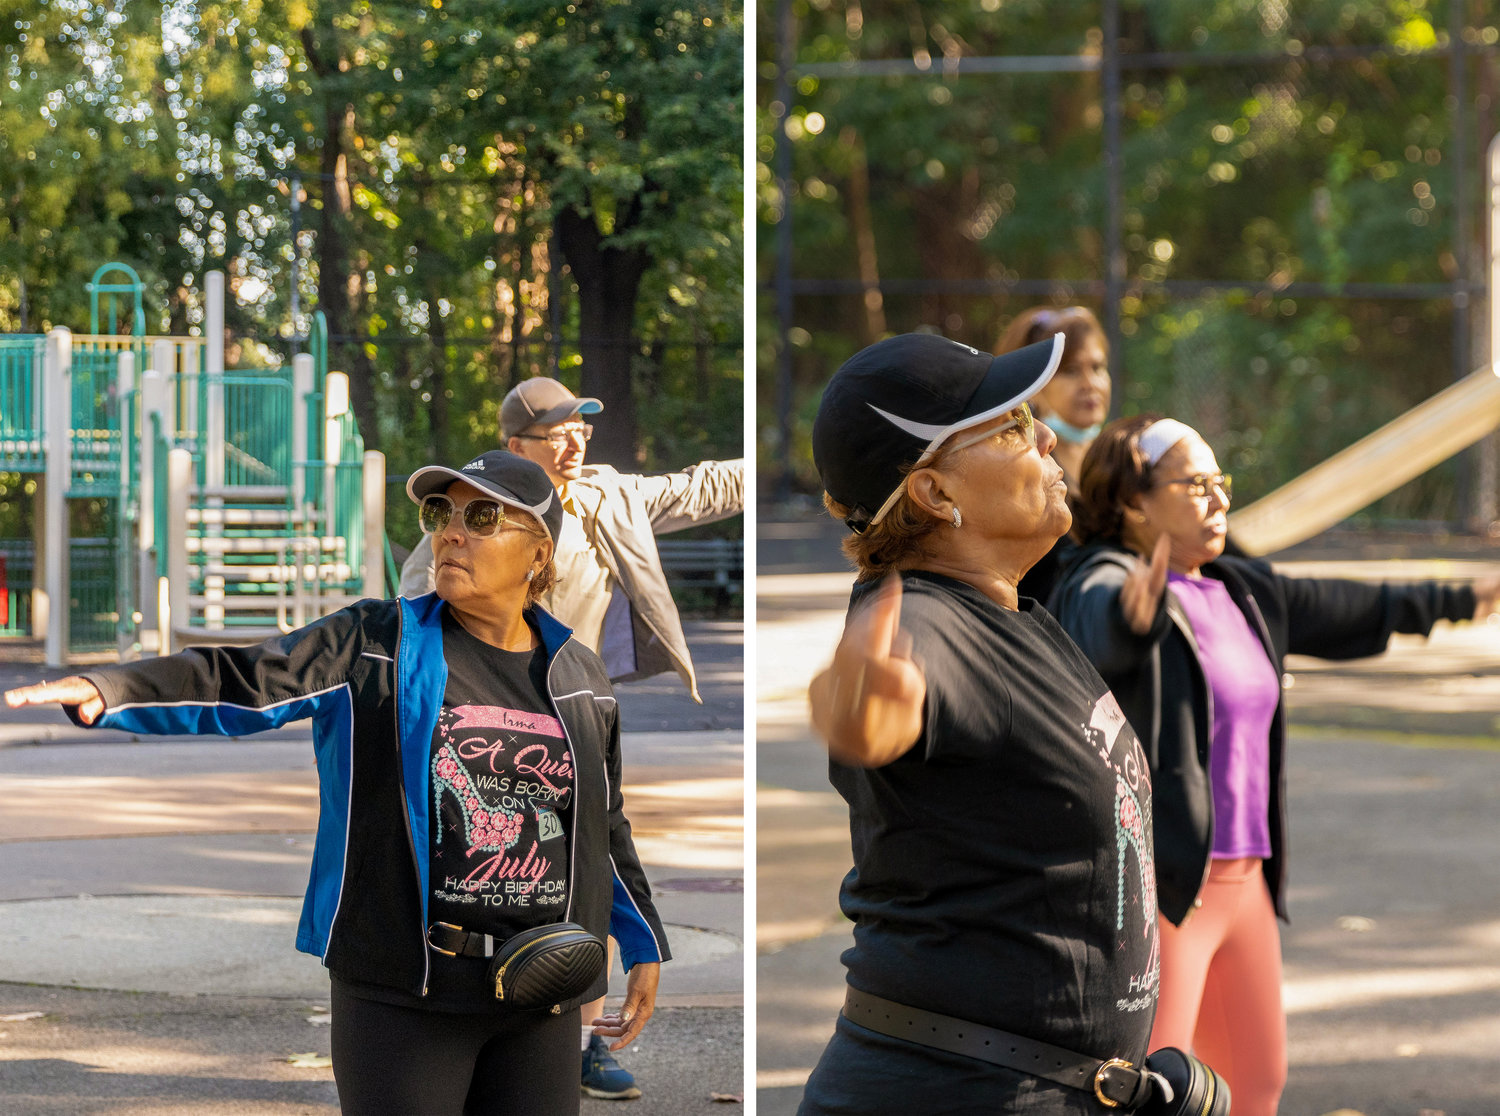 Students practice their steps in a Silver Shoes Dance Club class in Van Cortlandt Park’s Classic Playground. Daniela Del Giorno founded the club to teach older adults ballroom and Latin dancing as a way to keep them physically fit, mentally sharp and socially engaged.